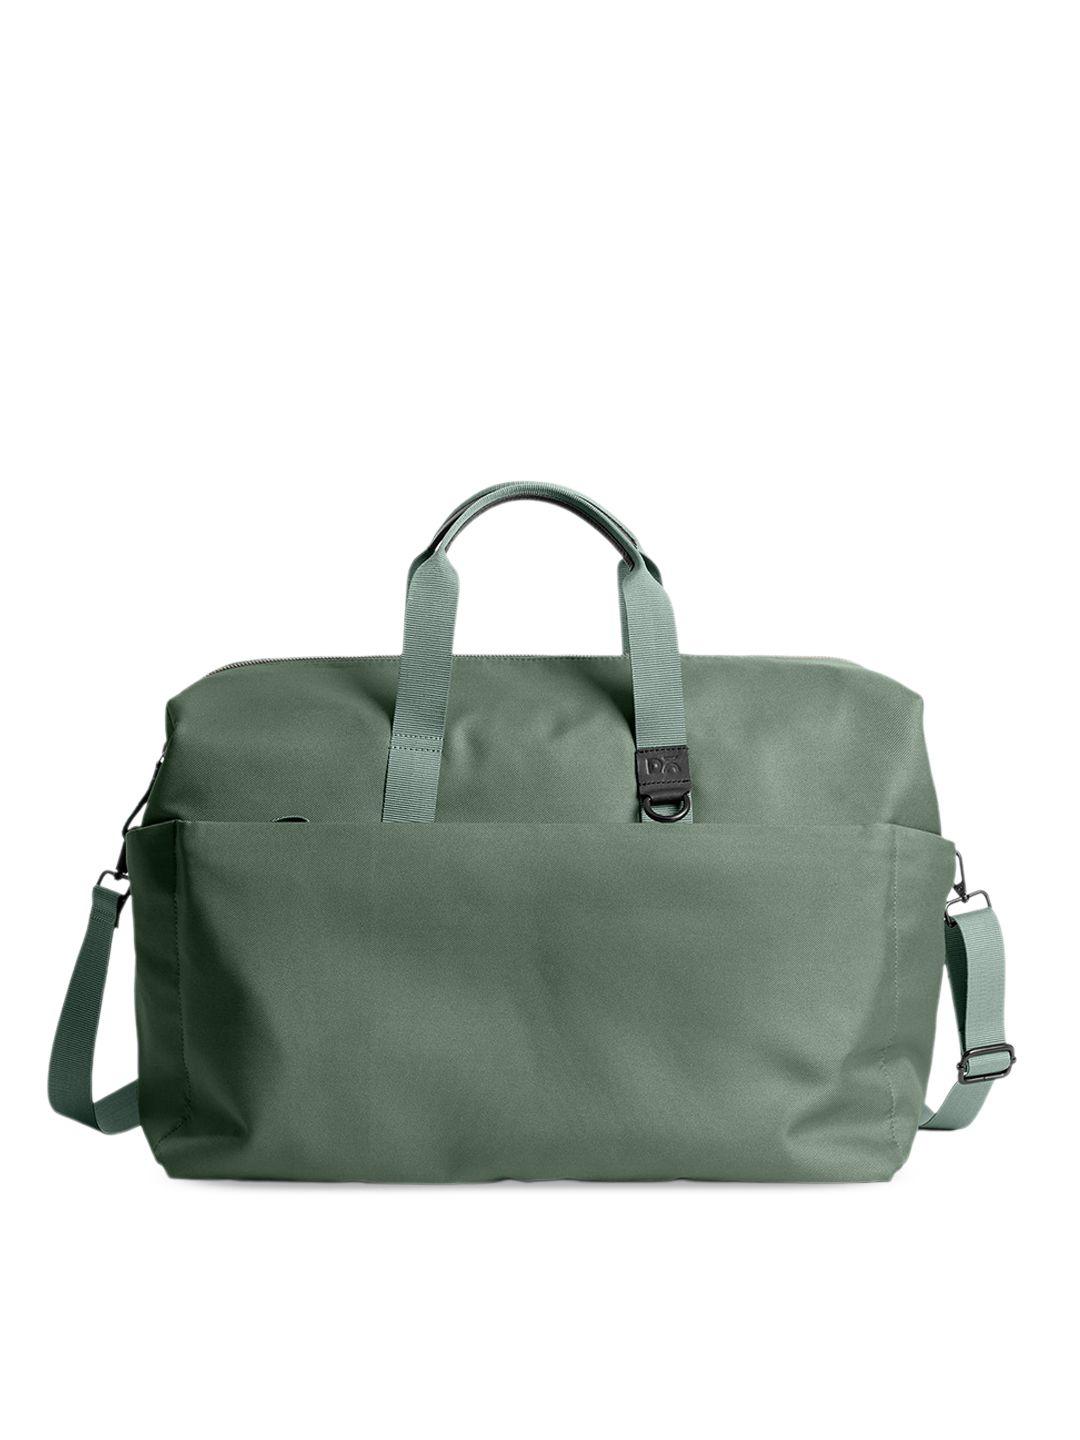 dailyobjects 100% recycled kelp gravity travel duffle bag